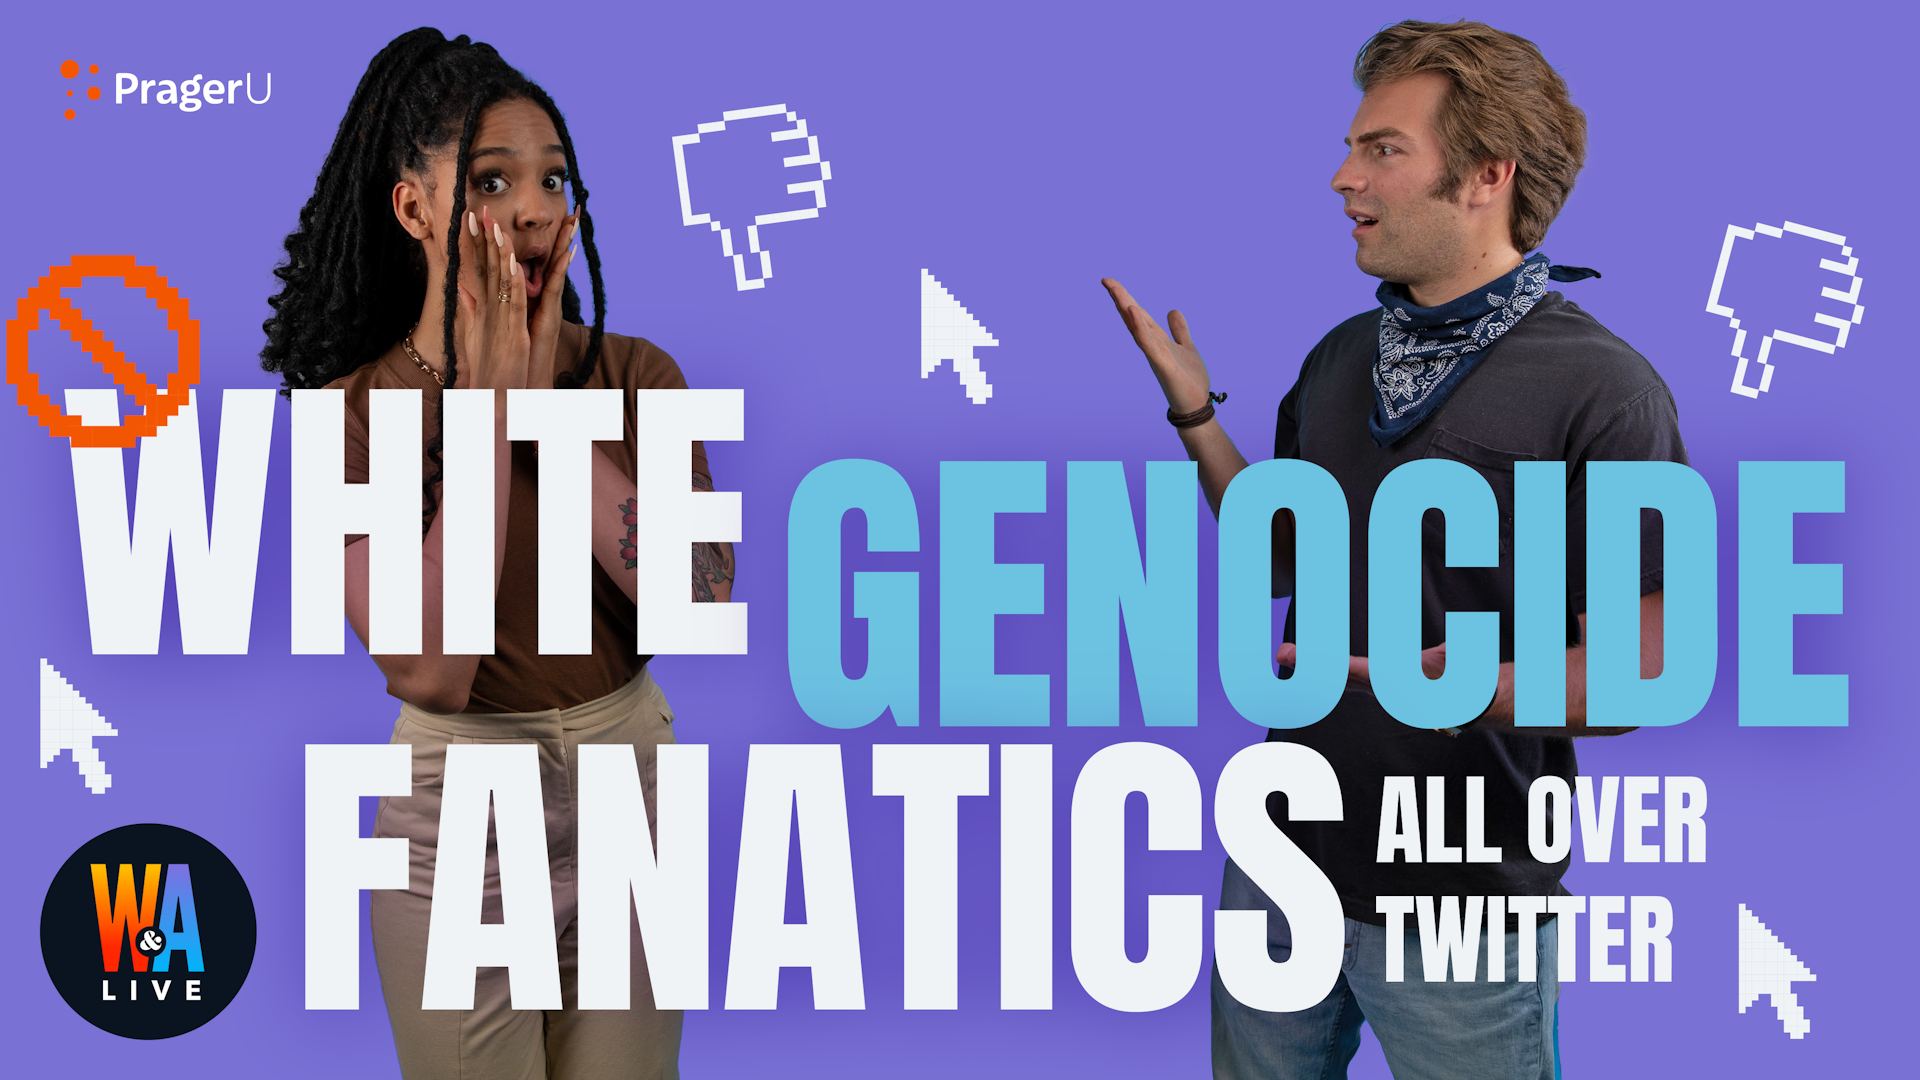 White Genocide Fanatics All over Twitter